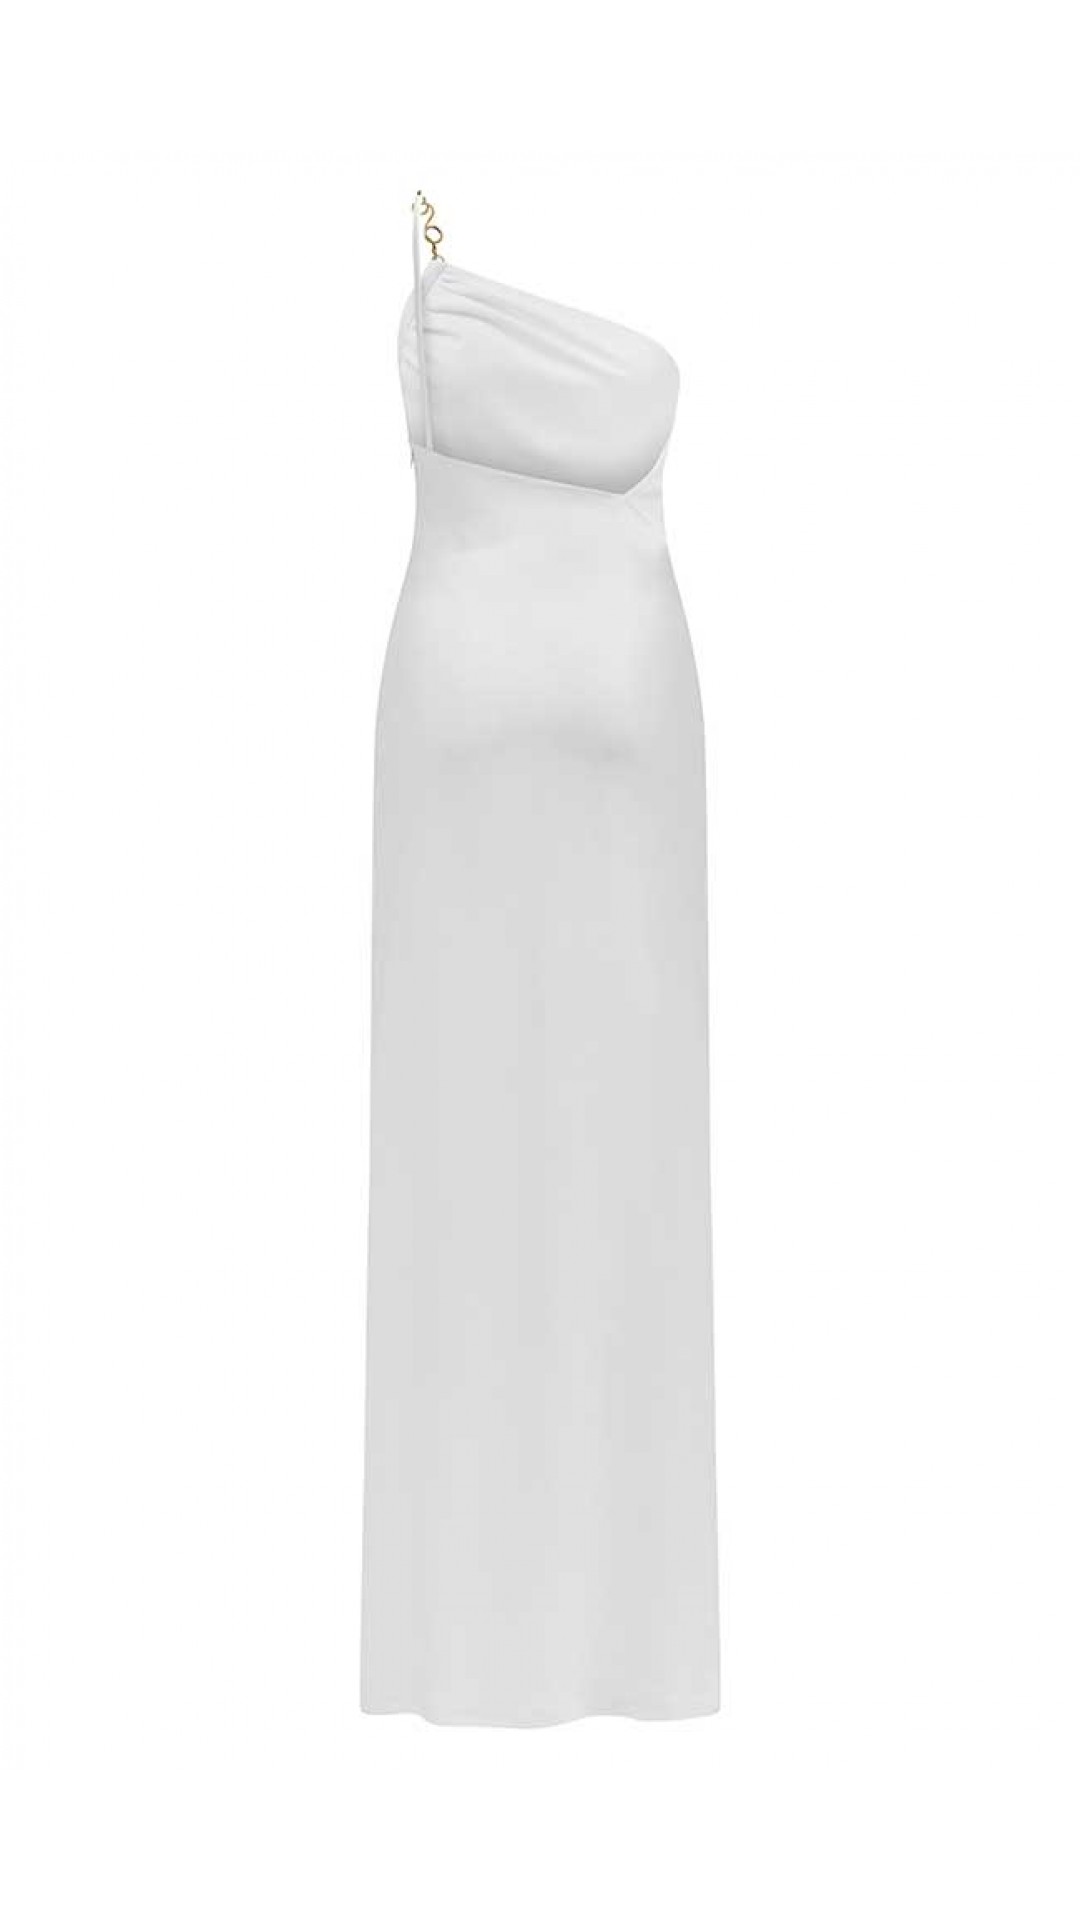 ACCESSORY ONE SHOULDER WHITE DRESS